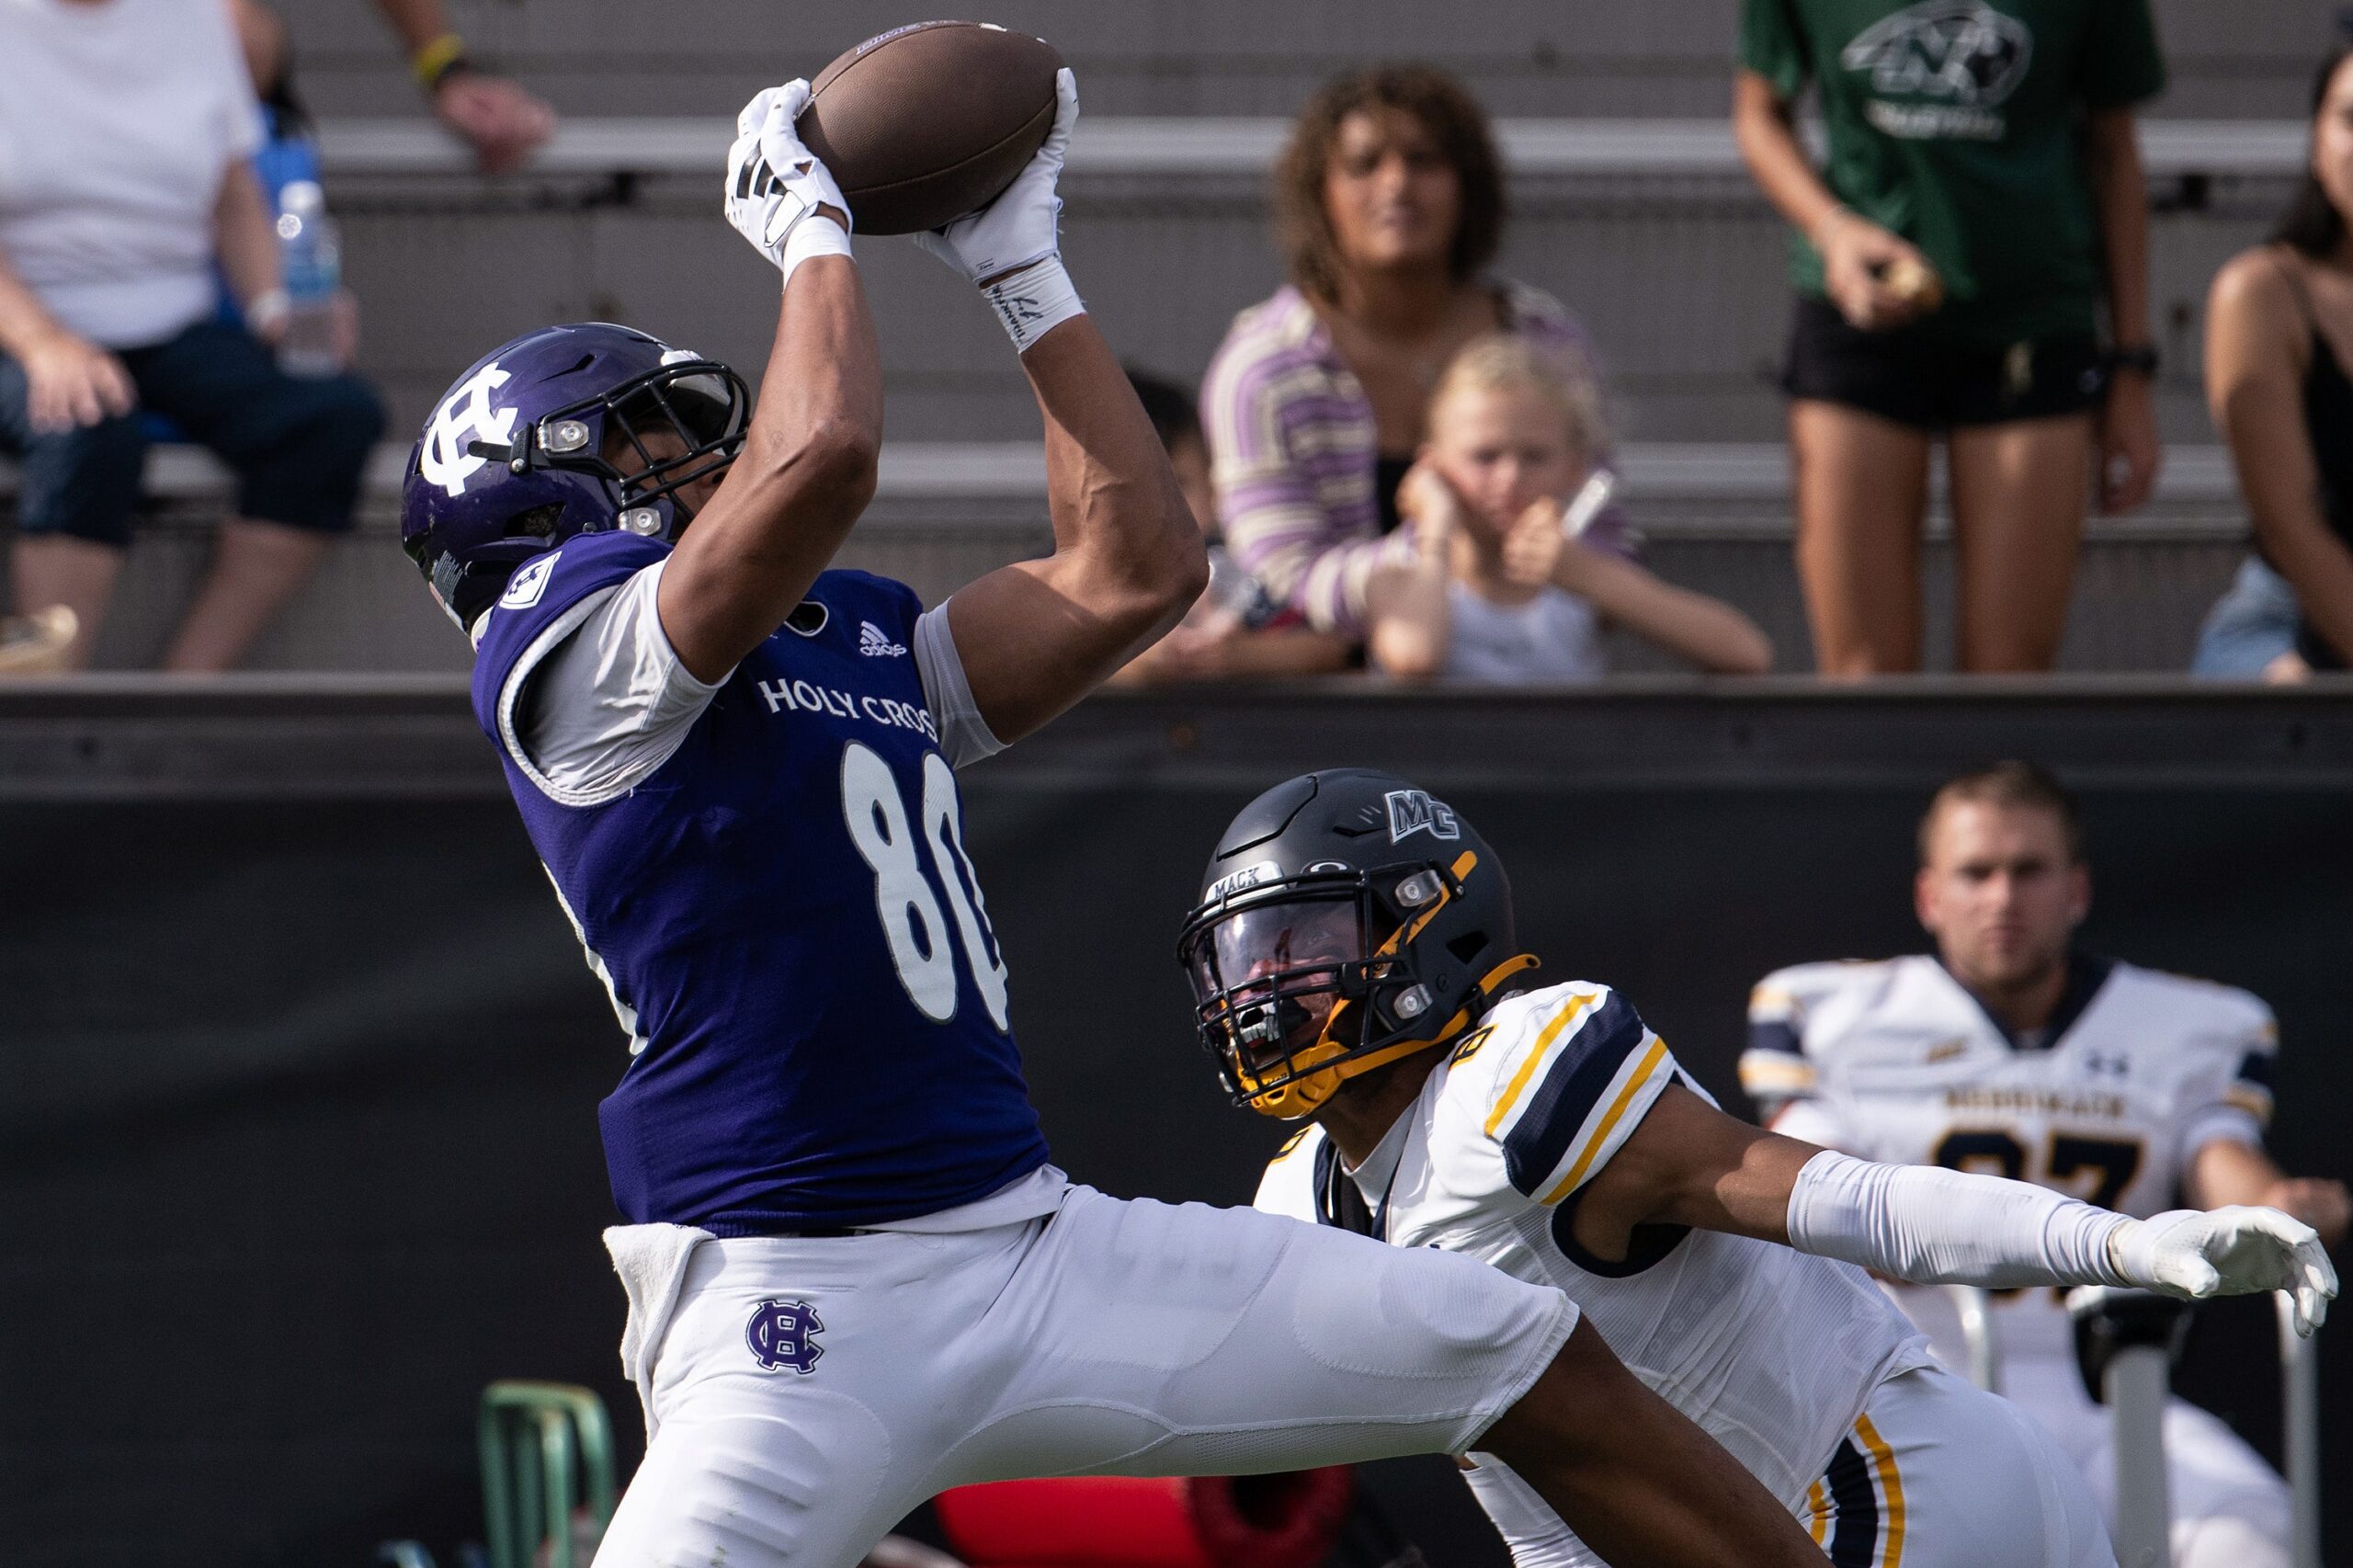 Holy Cross's Jalen Coker hauls in a pass for a first down over Merrimack's Darion McKenzie in the third quarter Saturday at Fitton Field. (Alan Arsenault/USA Today Network)